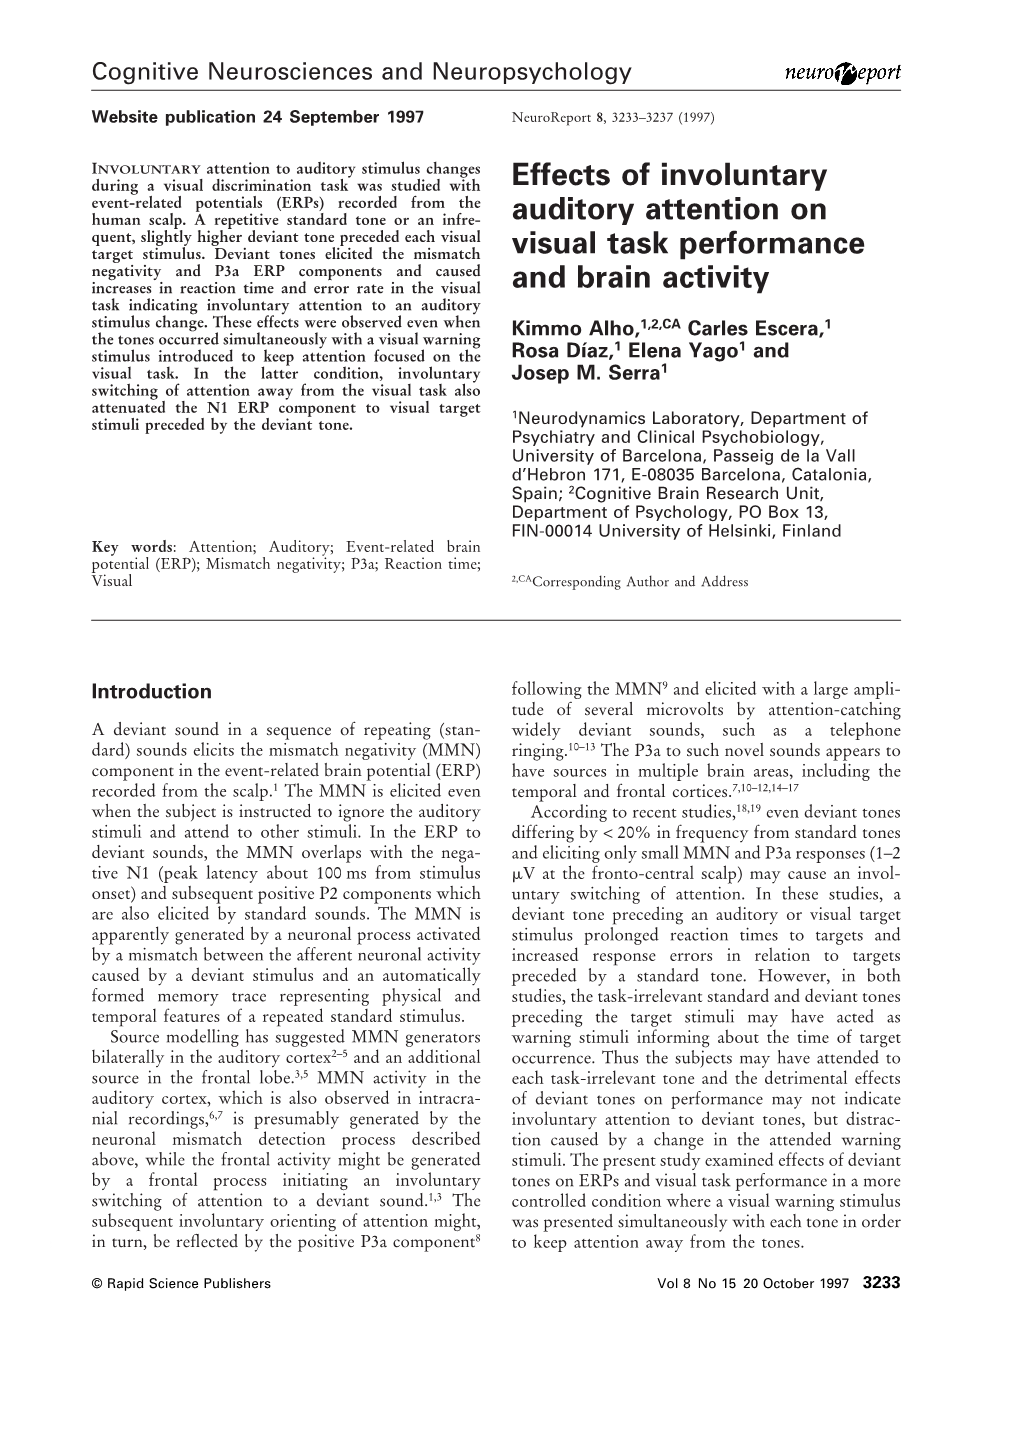 Effects of Involuntary Auditory Attention on Visual Task Performance and Brain Activity